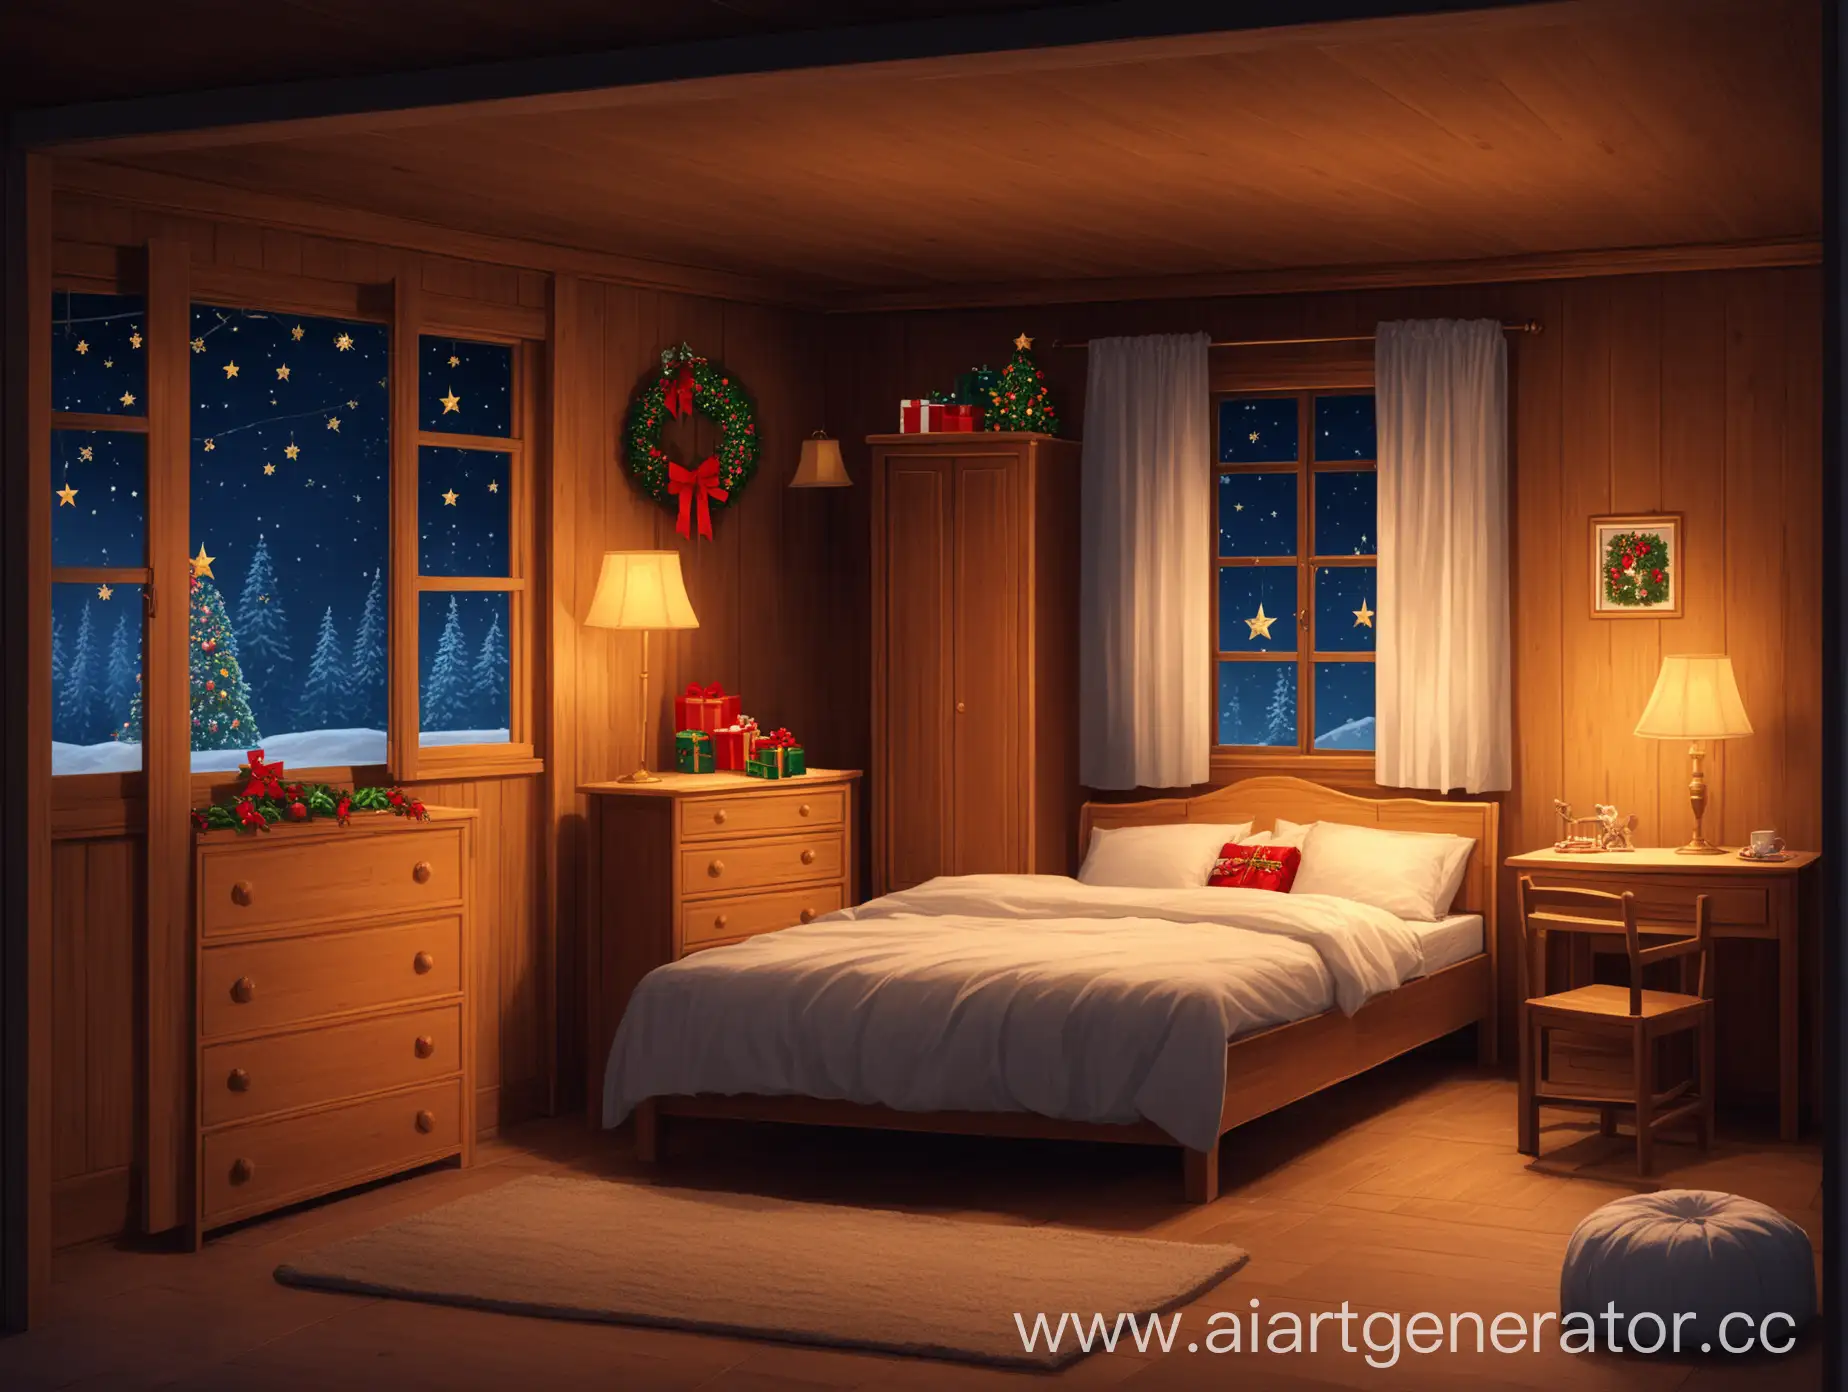 Wooden room with a bed and cozy furniture, it’s night outside the window, there’s a closet in the corner, Holiday mood 